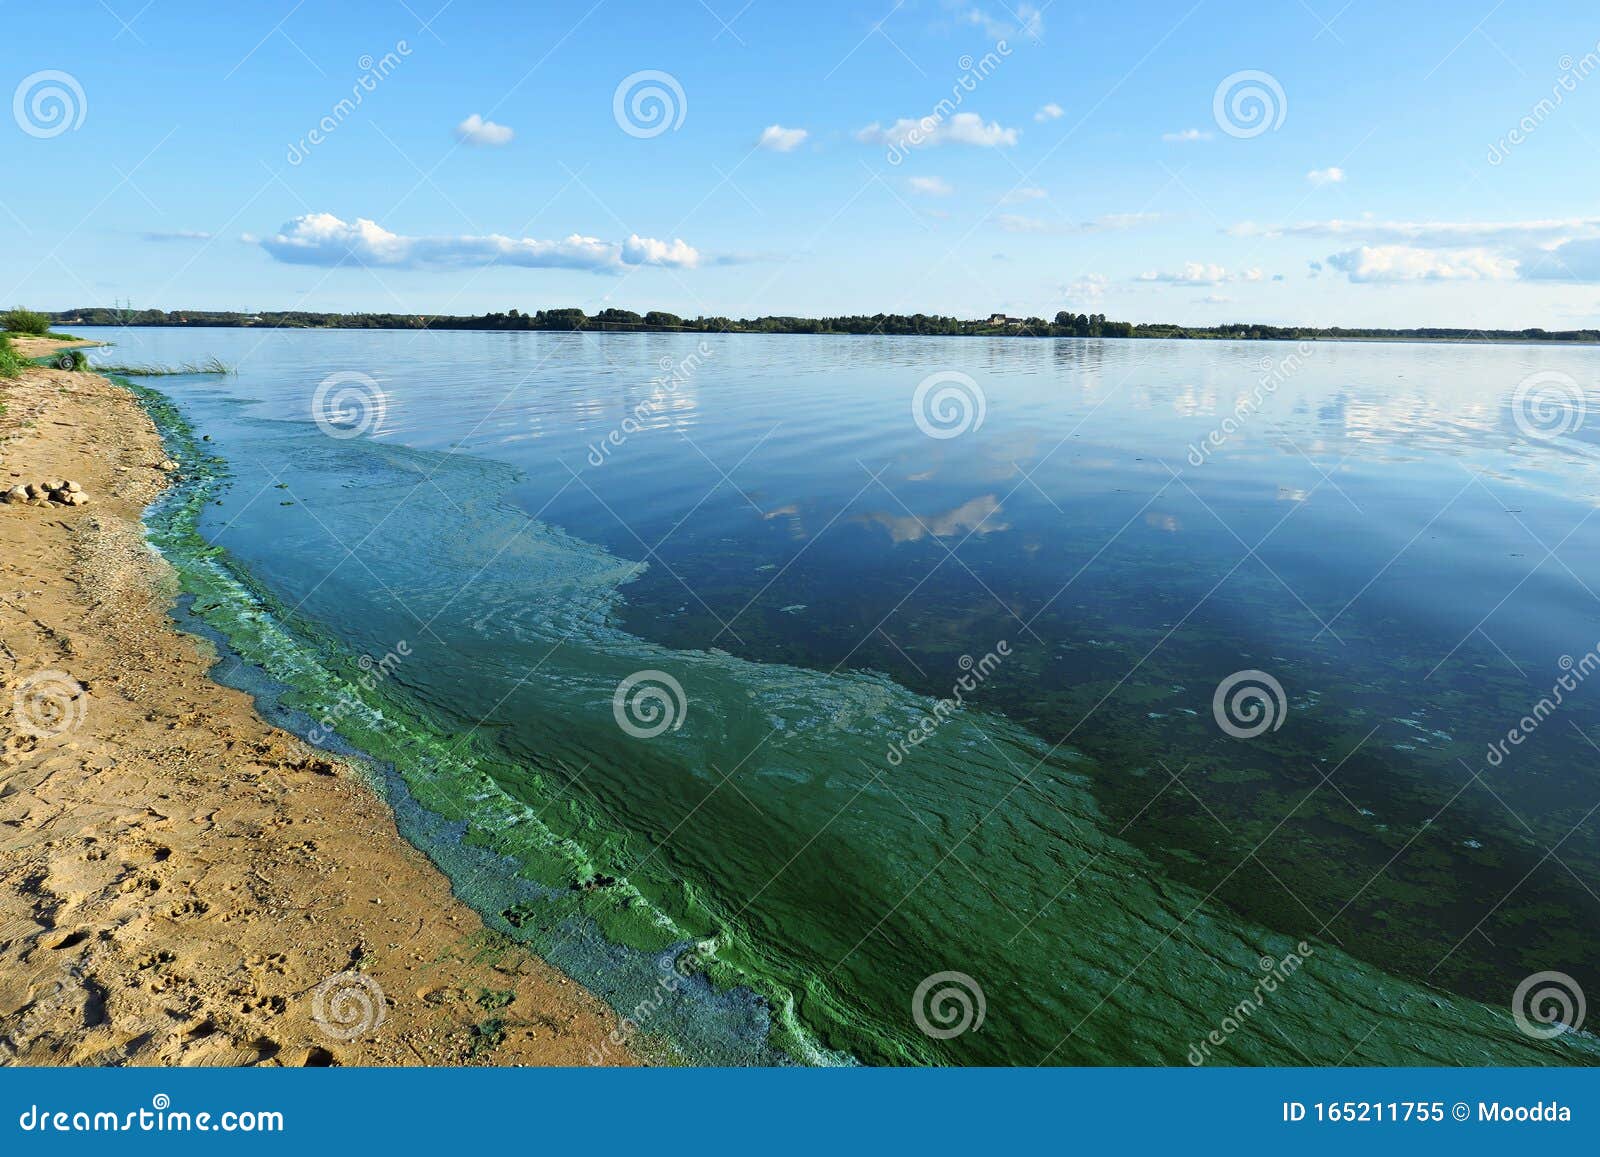 blue green algae bloom of river in the pollution area